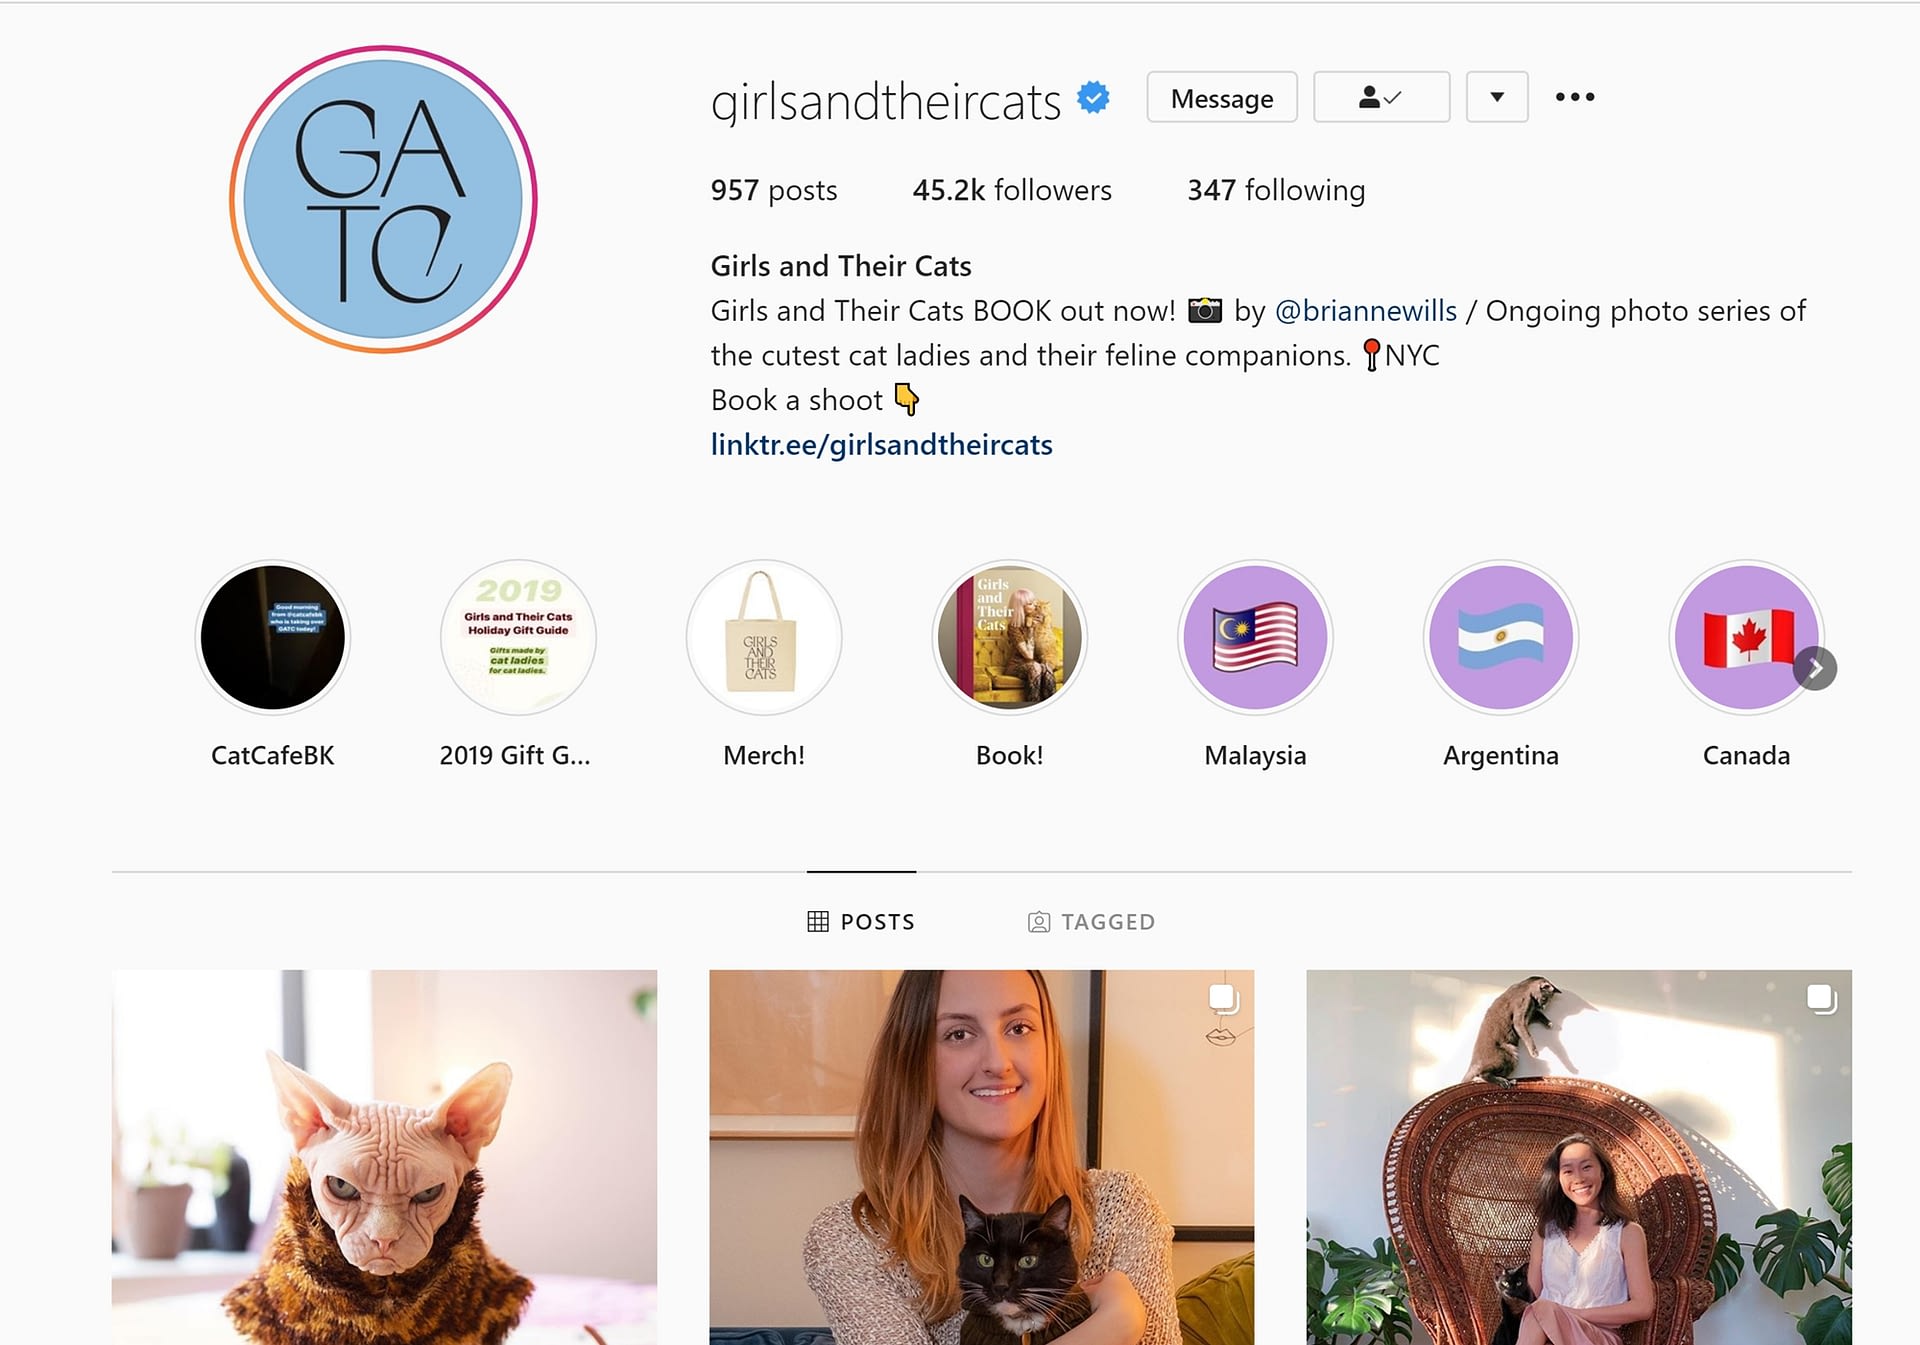 How to get verified on Instagram: Girls and Their Cats